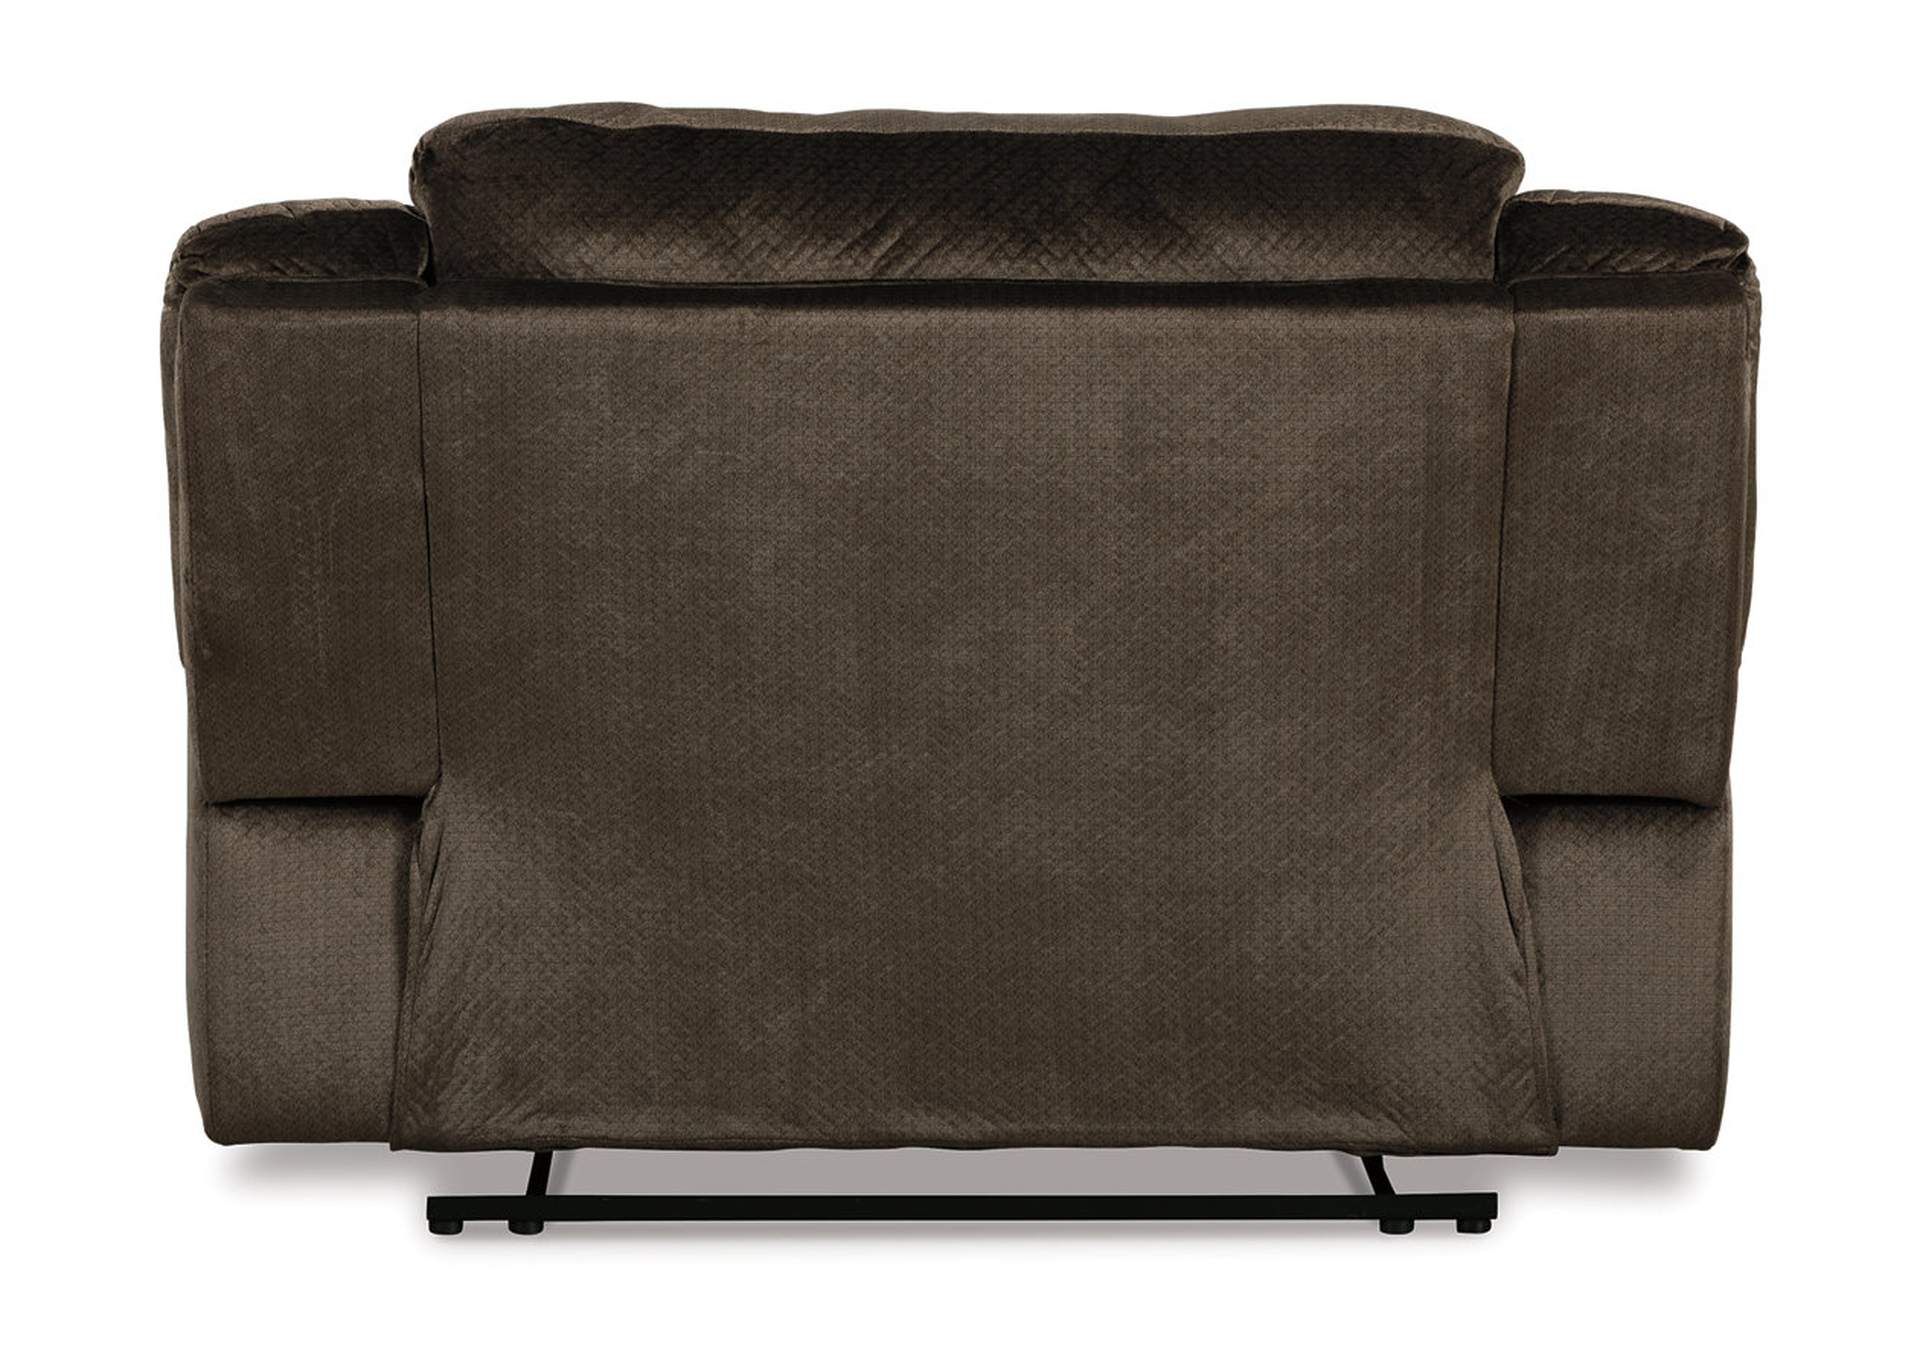 Clonmel Oversized Recliner,Signature Design By Ashley